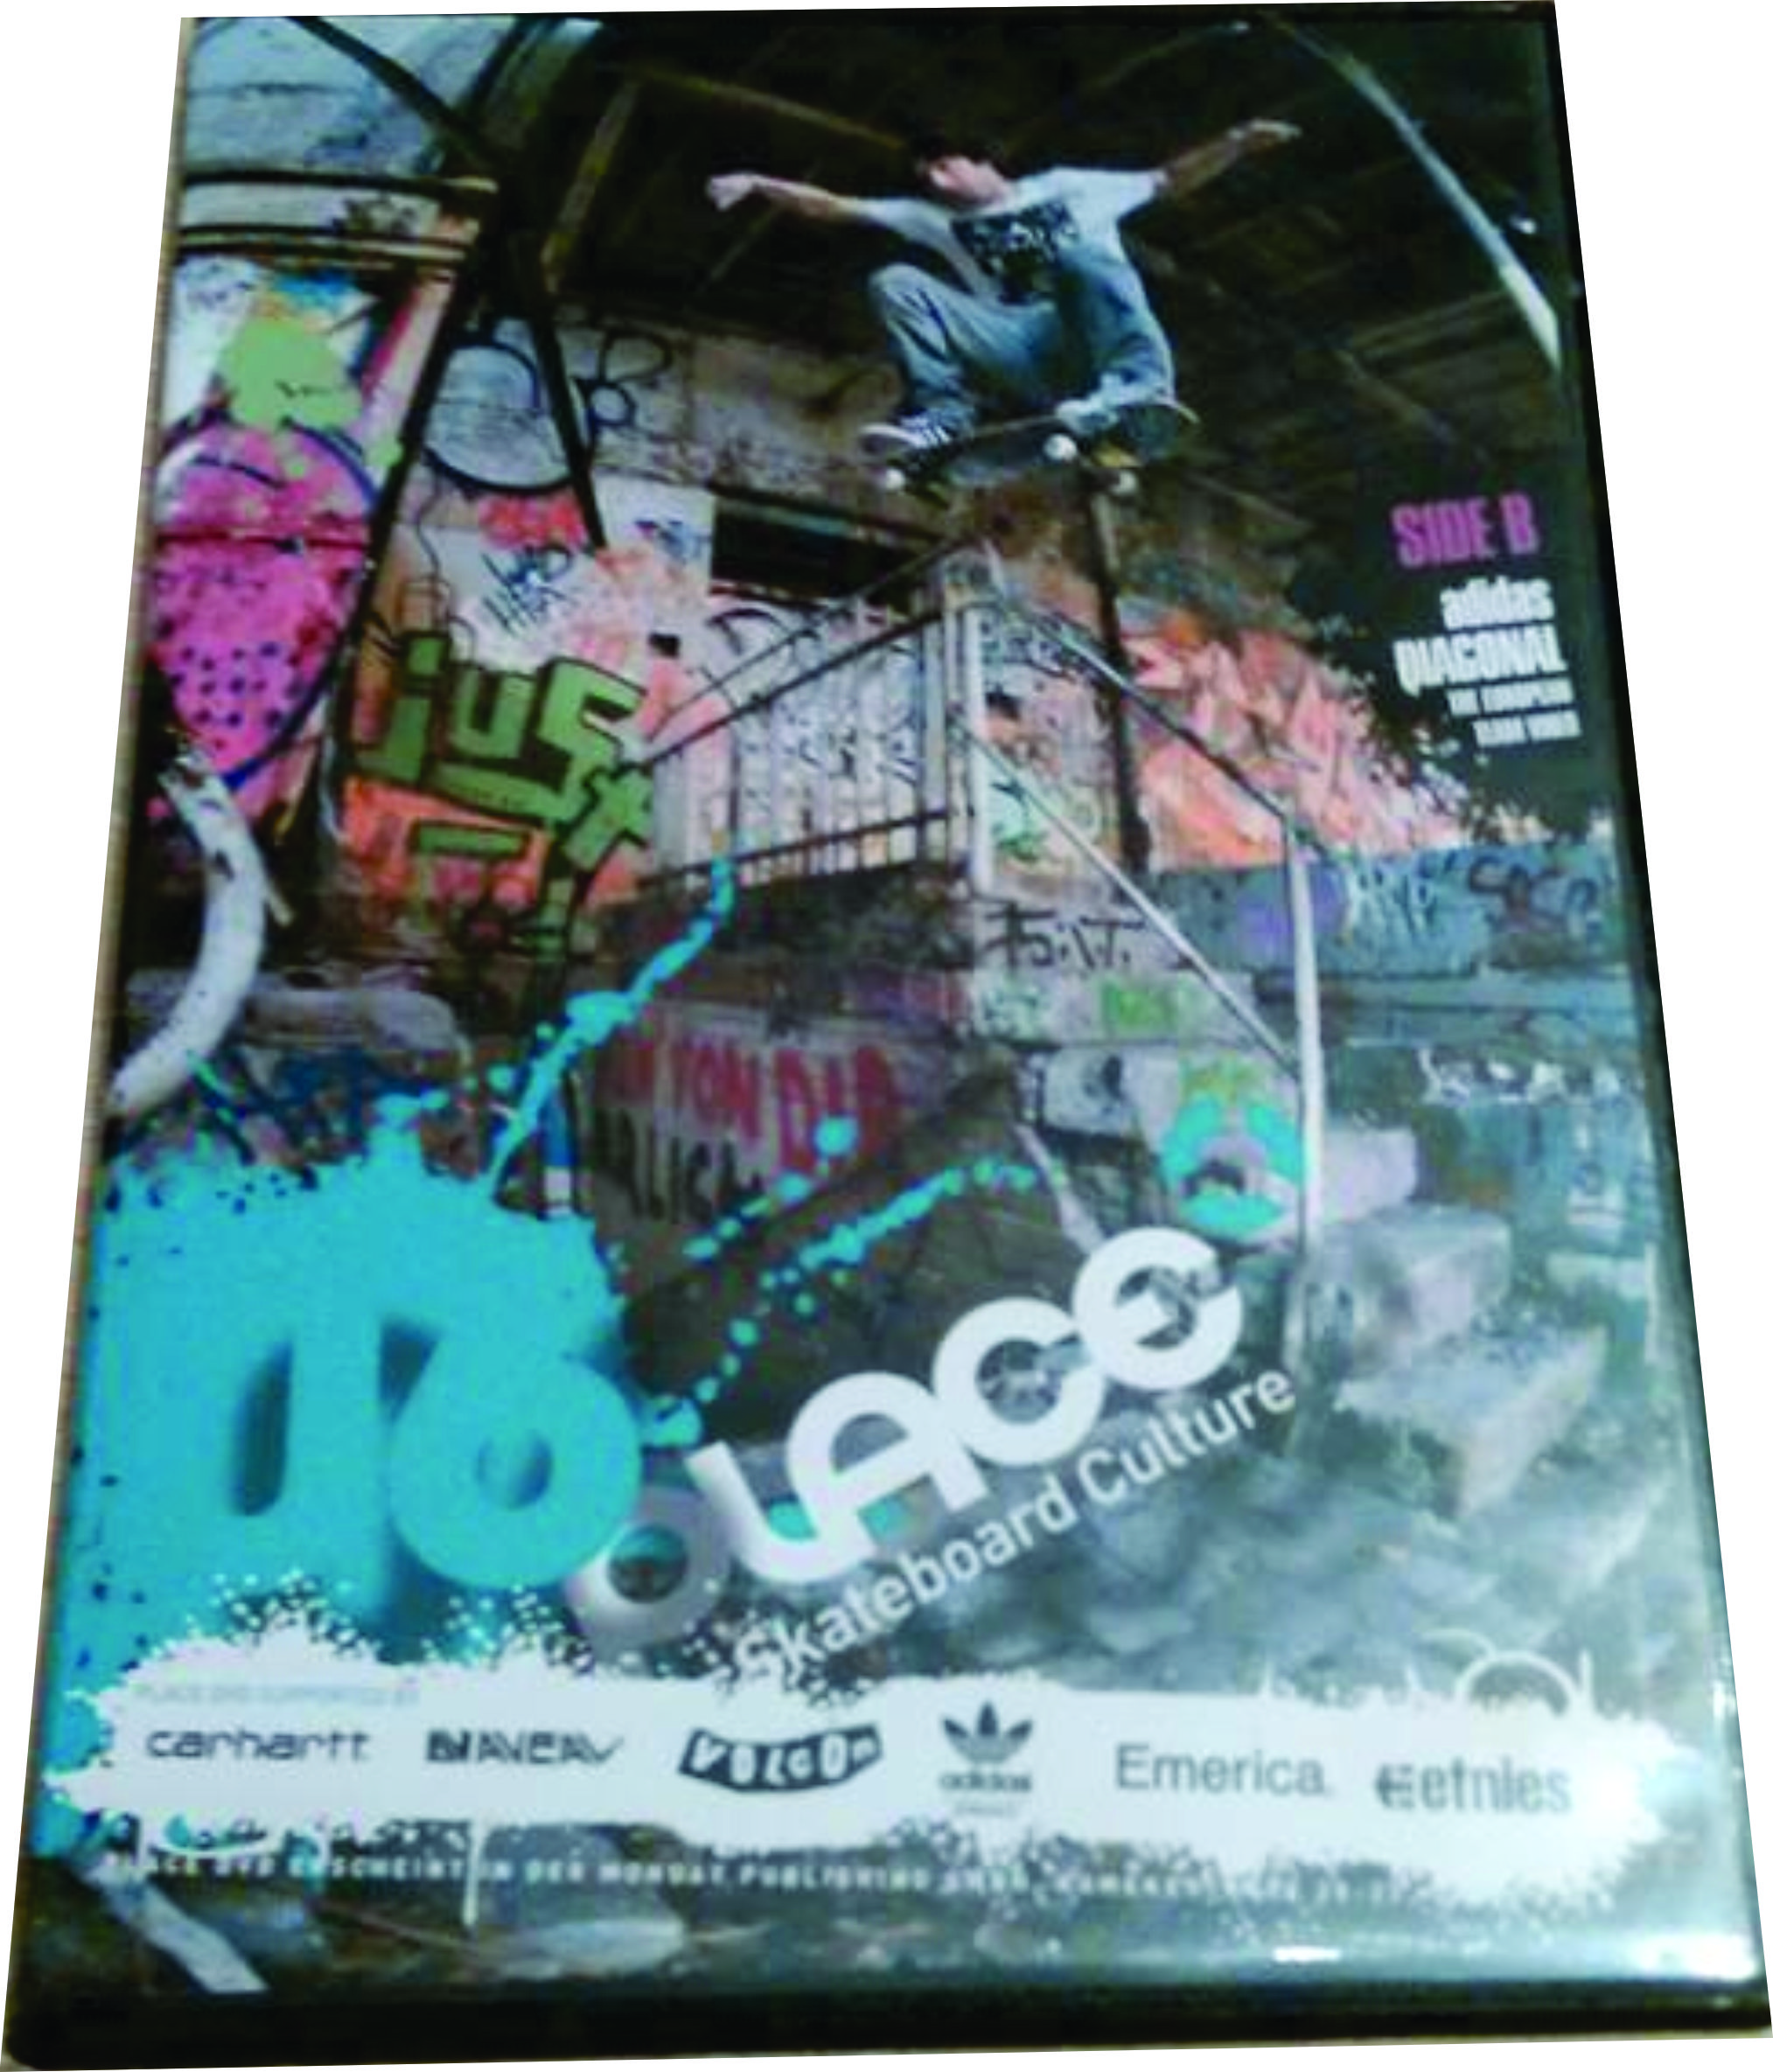 Place - Issue 6 cover